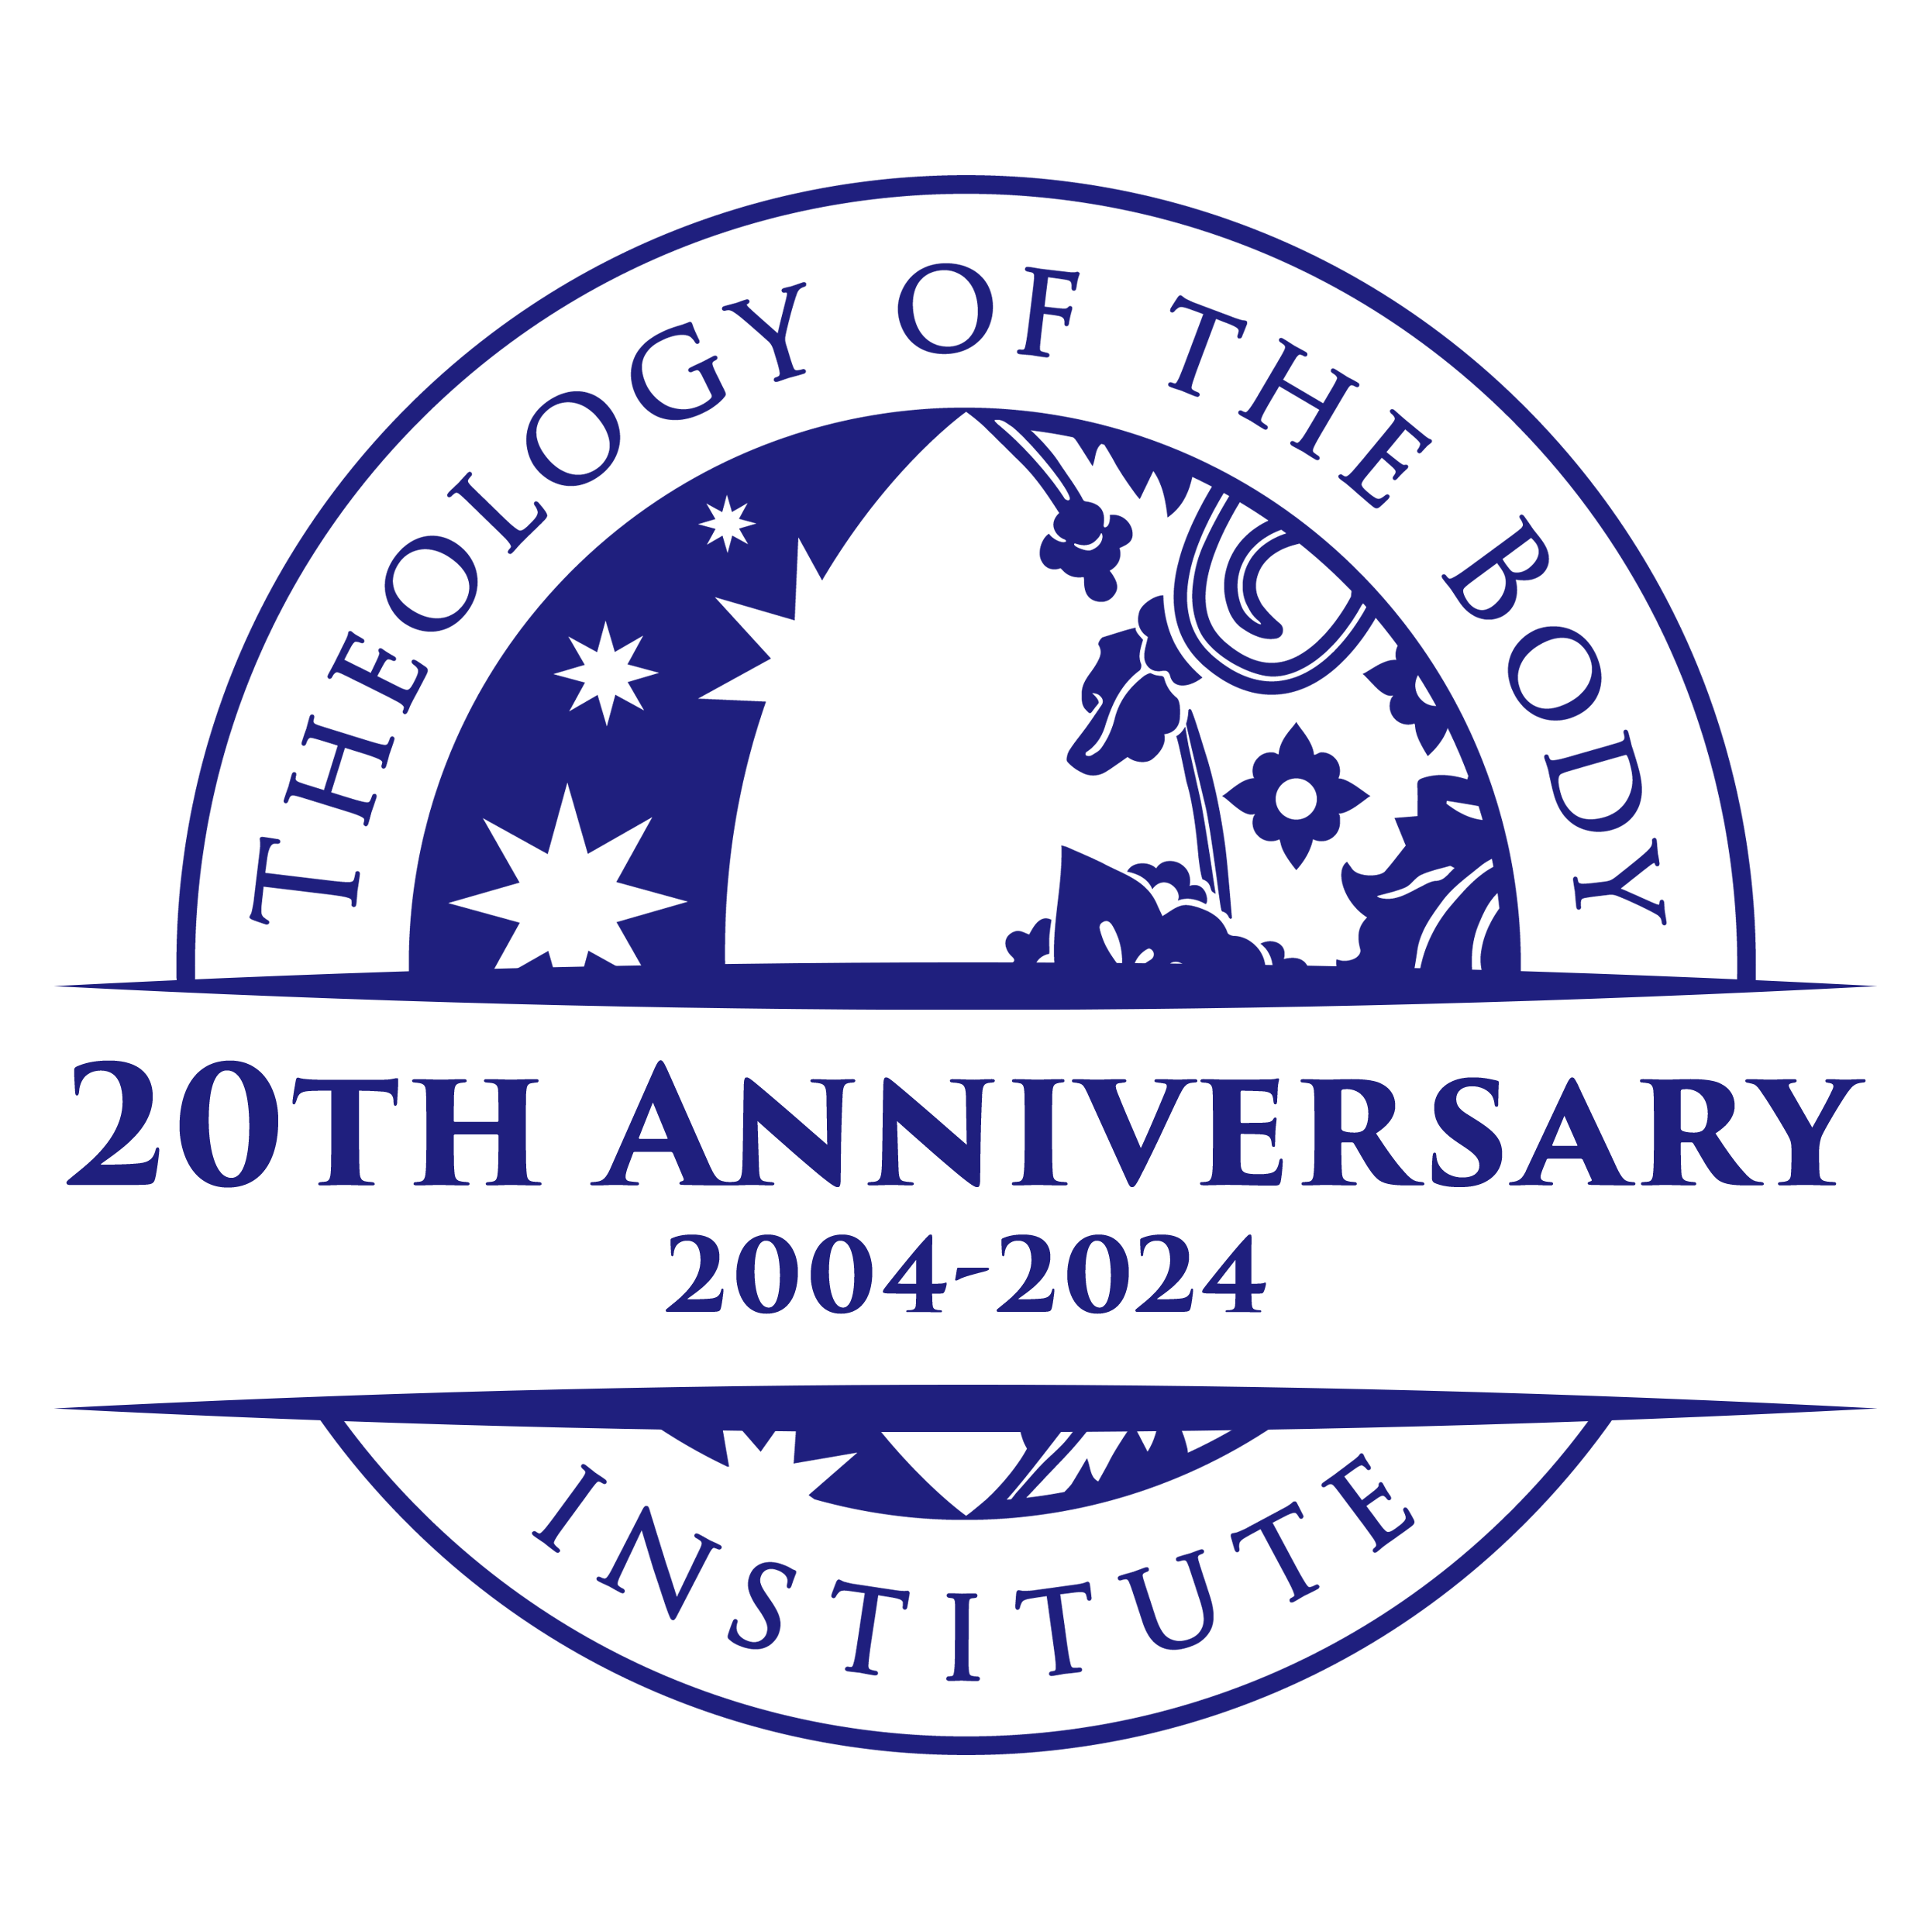 Theology of the Body Institute